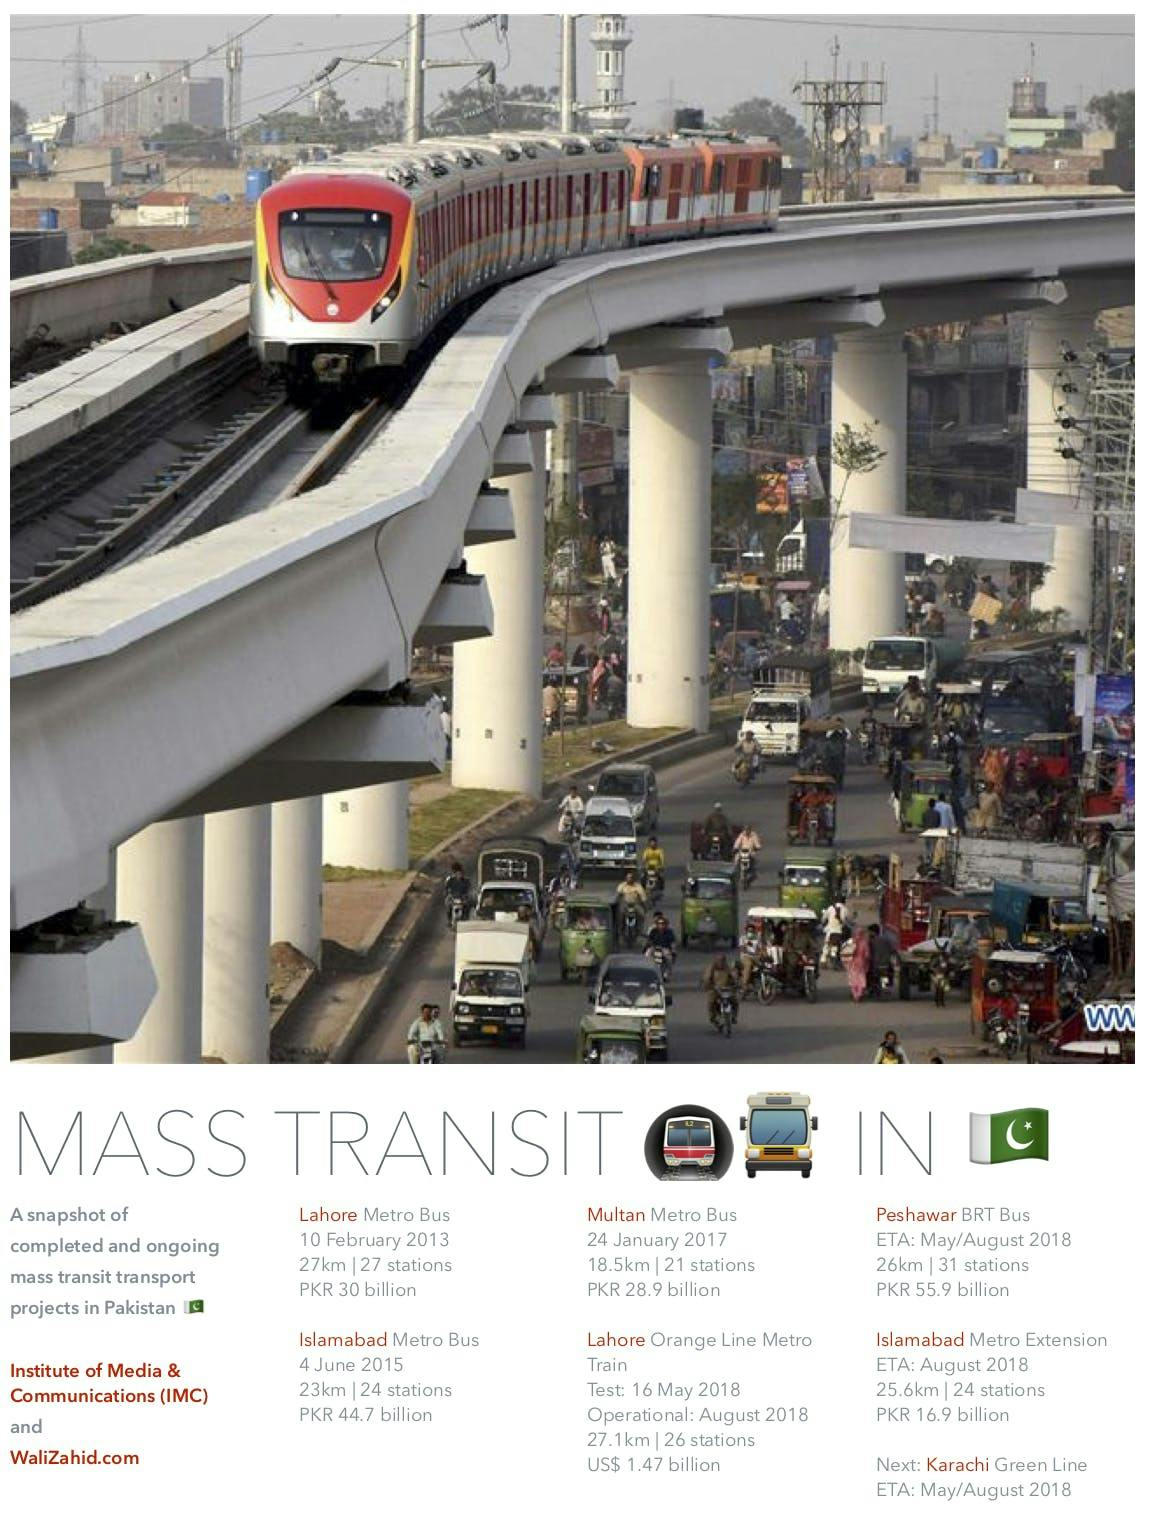 A snapshot of completed and ongoing mass transit transport projects in Pakistan